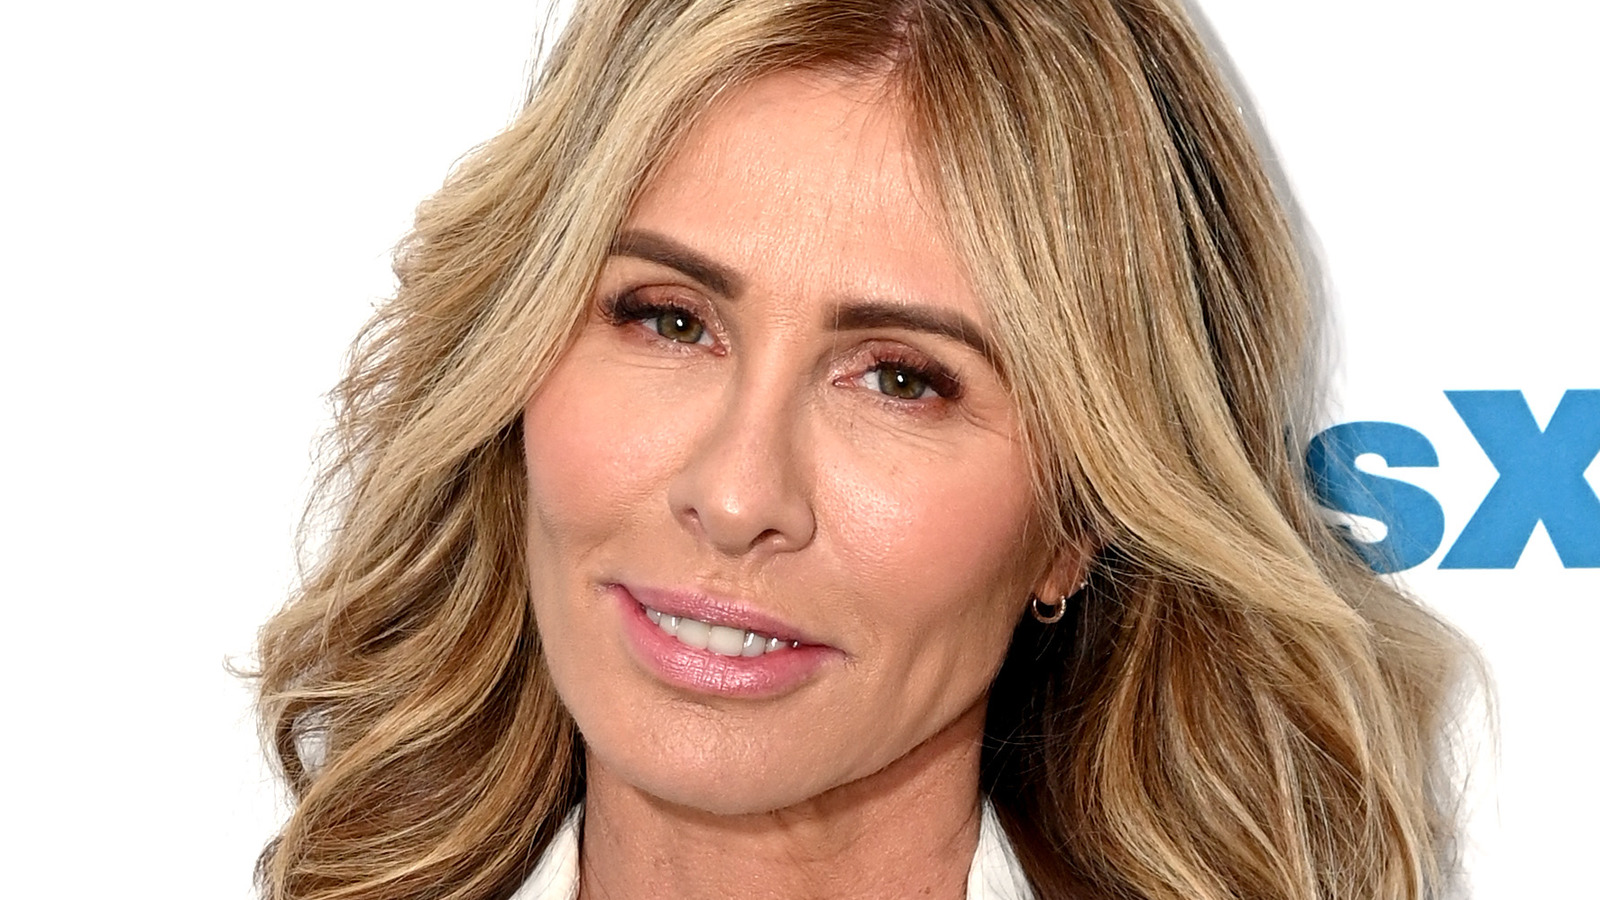 Celebs: Carole Radziwill Noticed Something Eerie In The Markle Interview